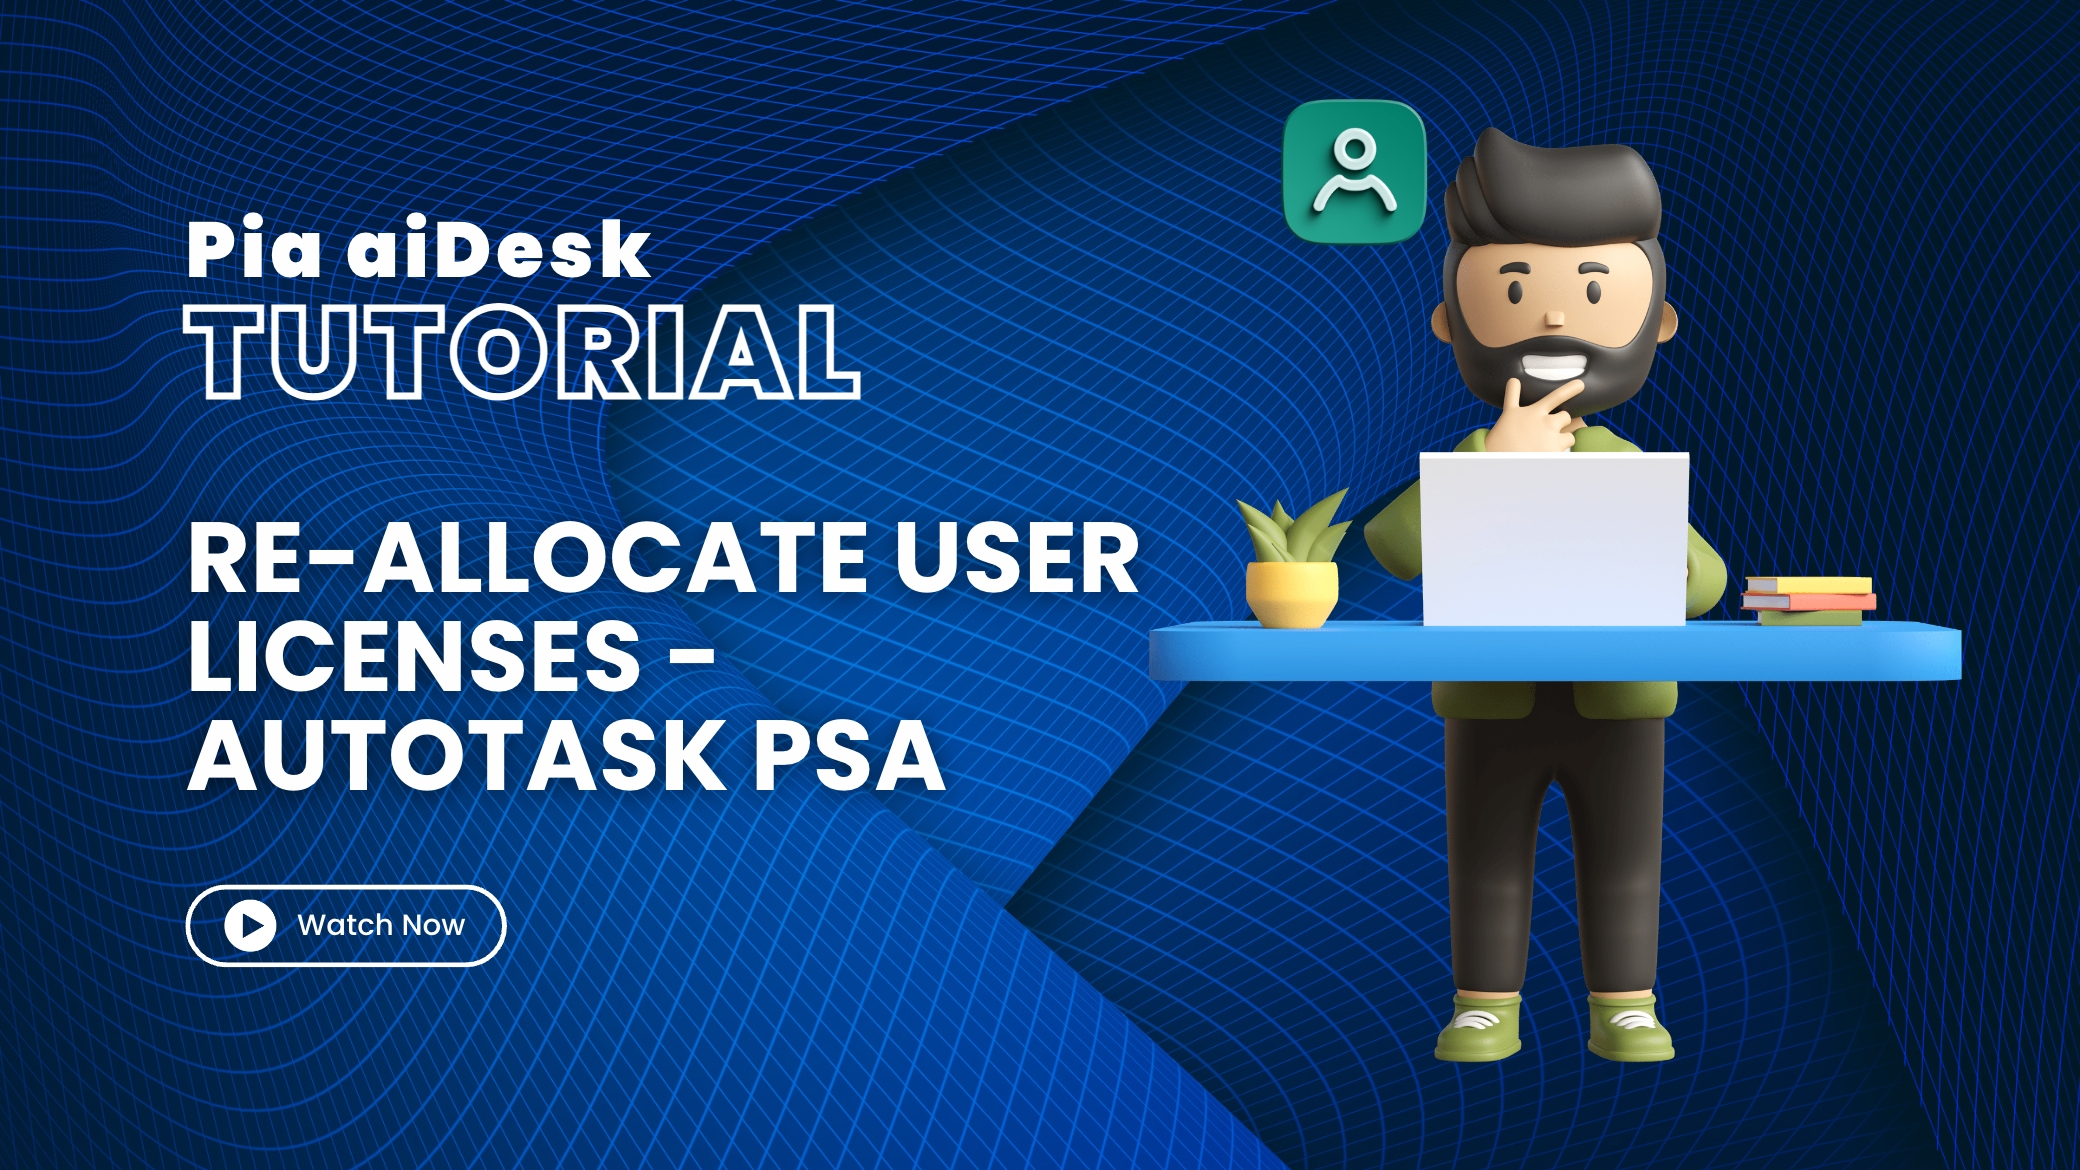 How to Reallocate User Licenses in MS O365 with Pia aiDesk in Autotask PSA